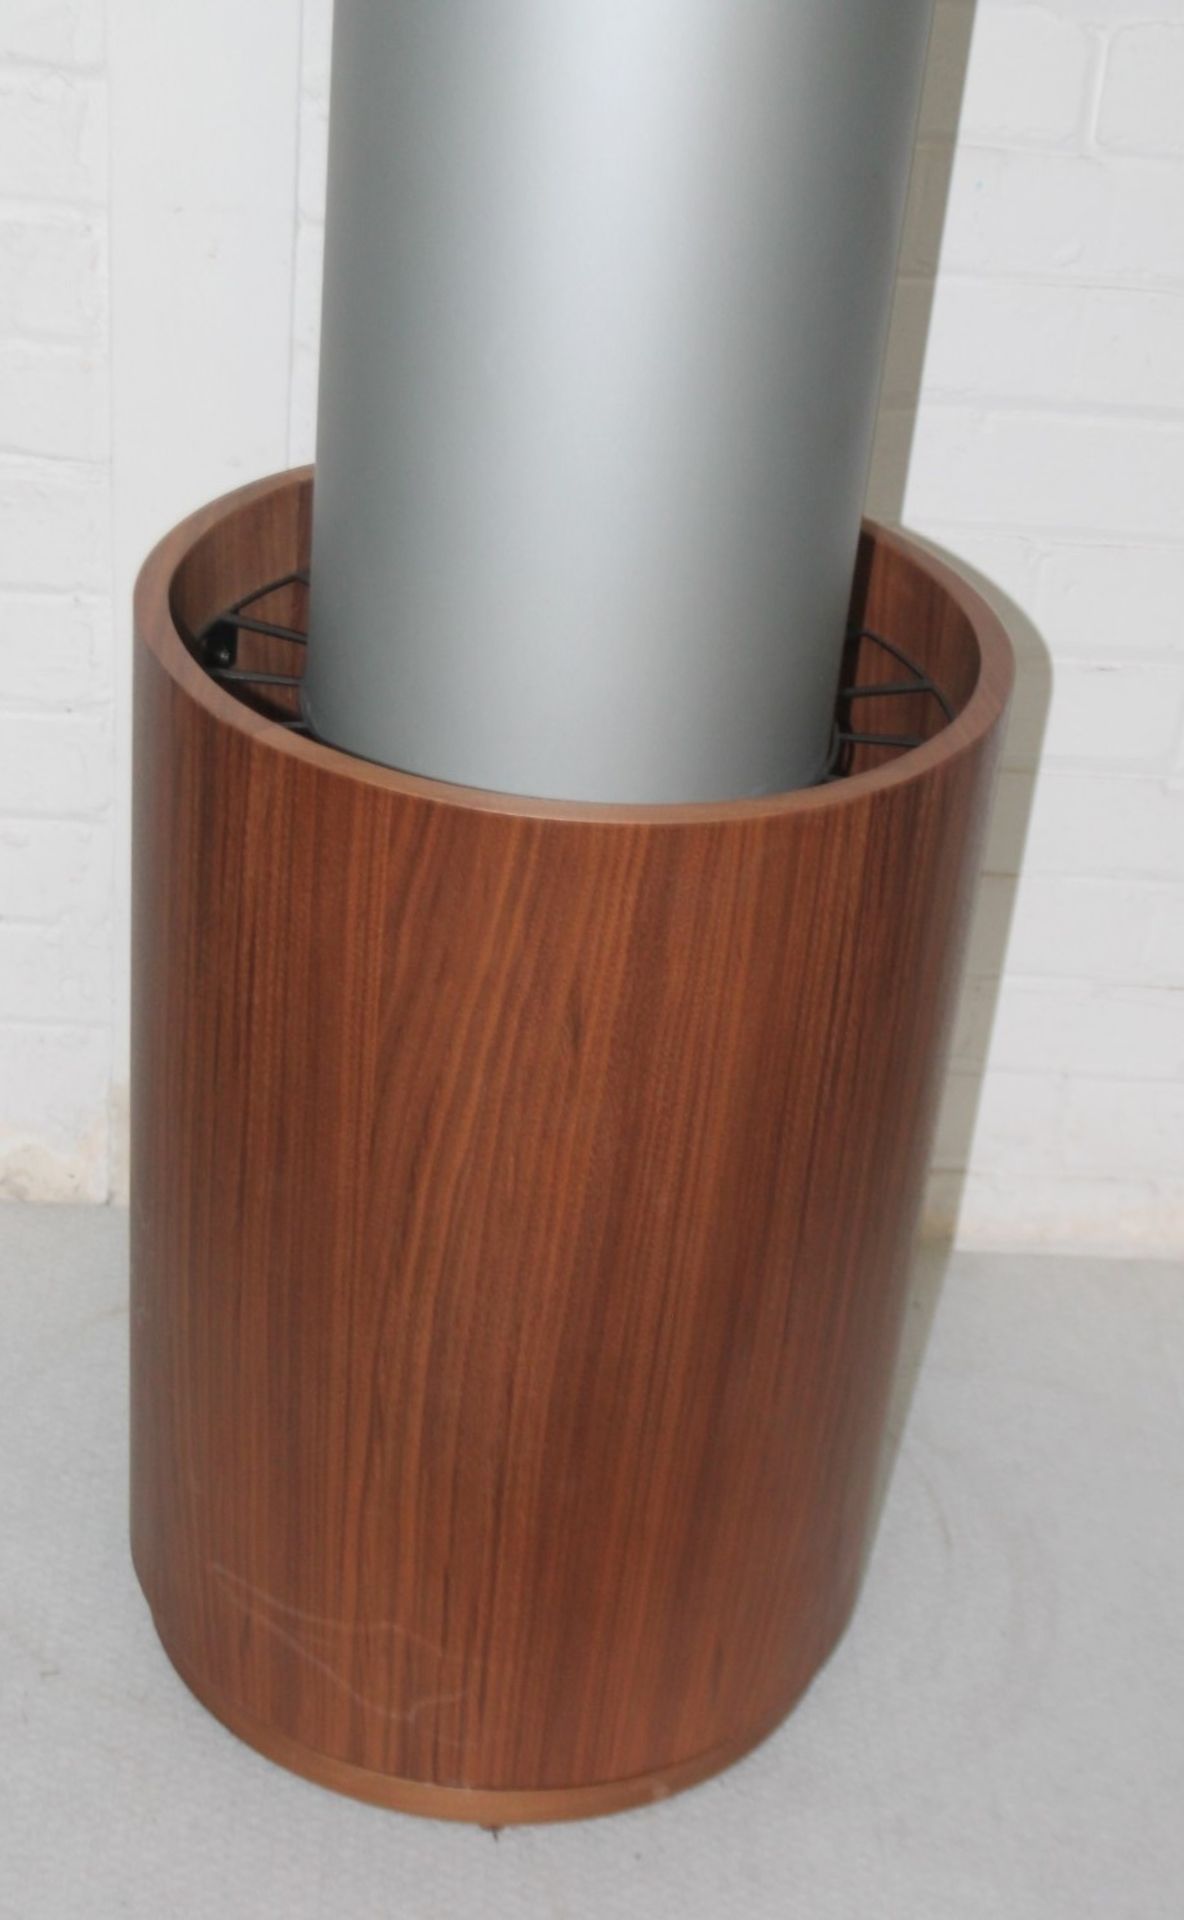 1 x Revolving Retail Display Stand - Dimensions: Height 151cm / Diameter 40cm - Ex-Showroom - Image 4 of 6